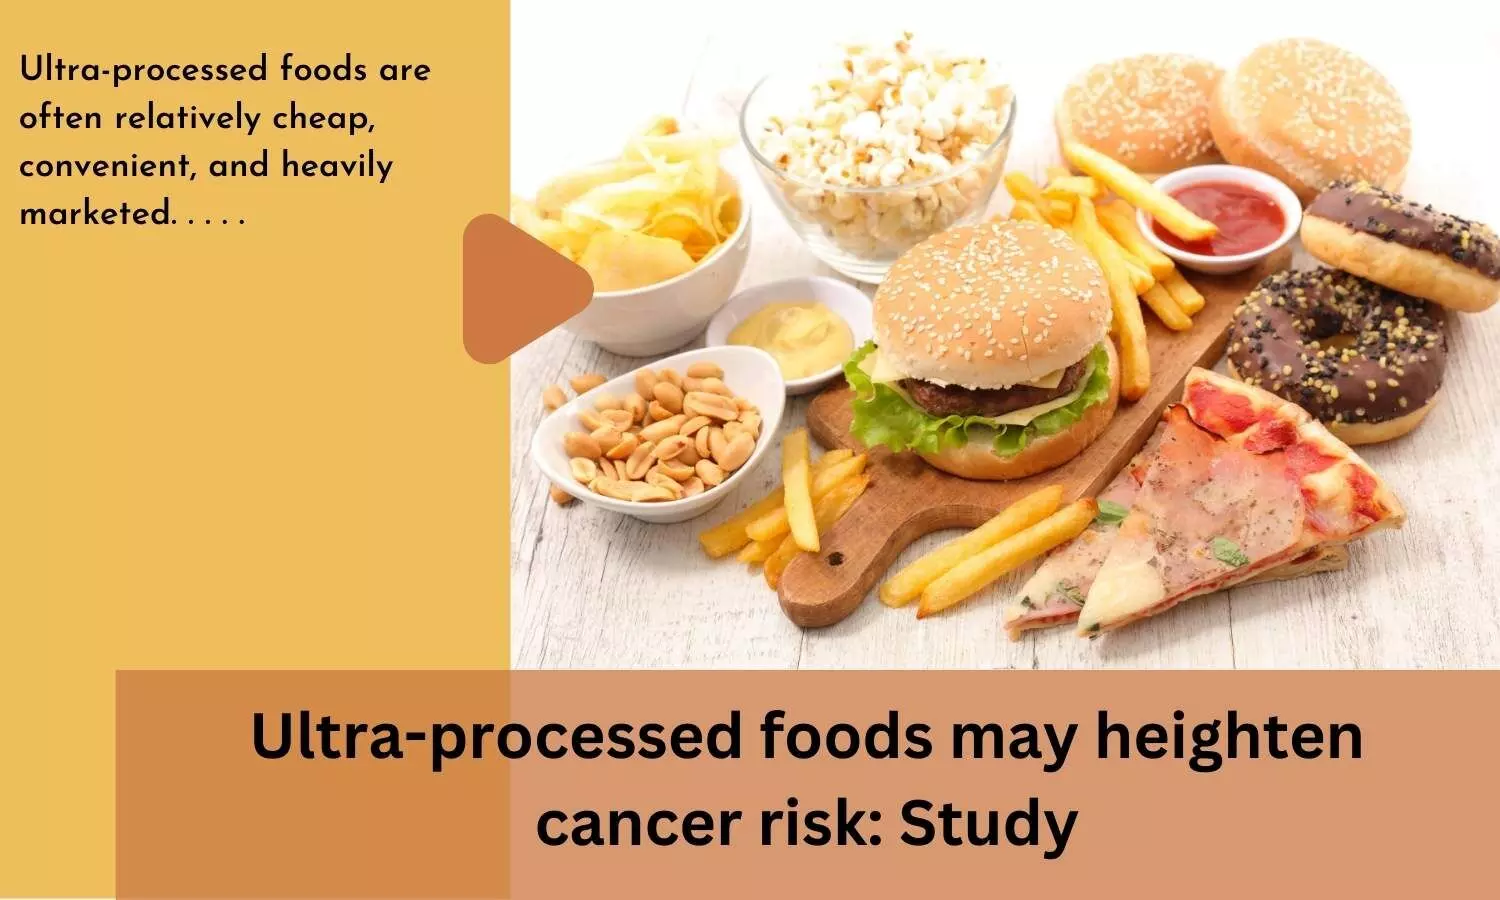 Ultra-processed foods may heighten cancer risk: Study